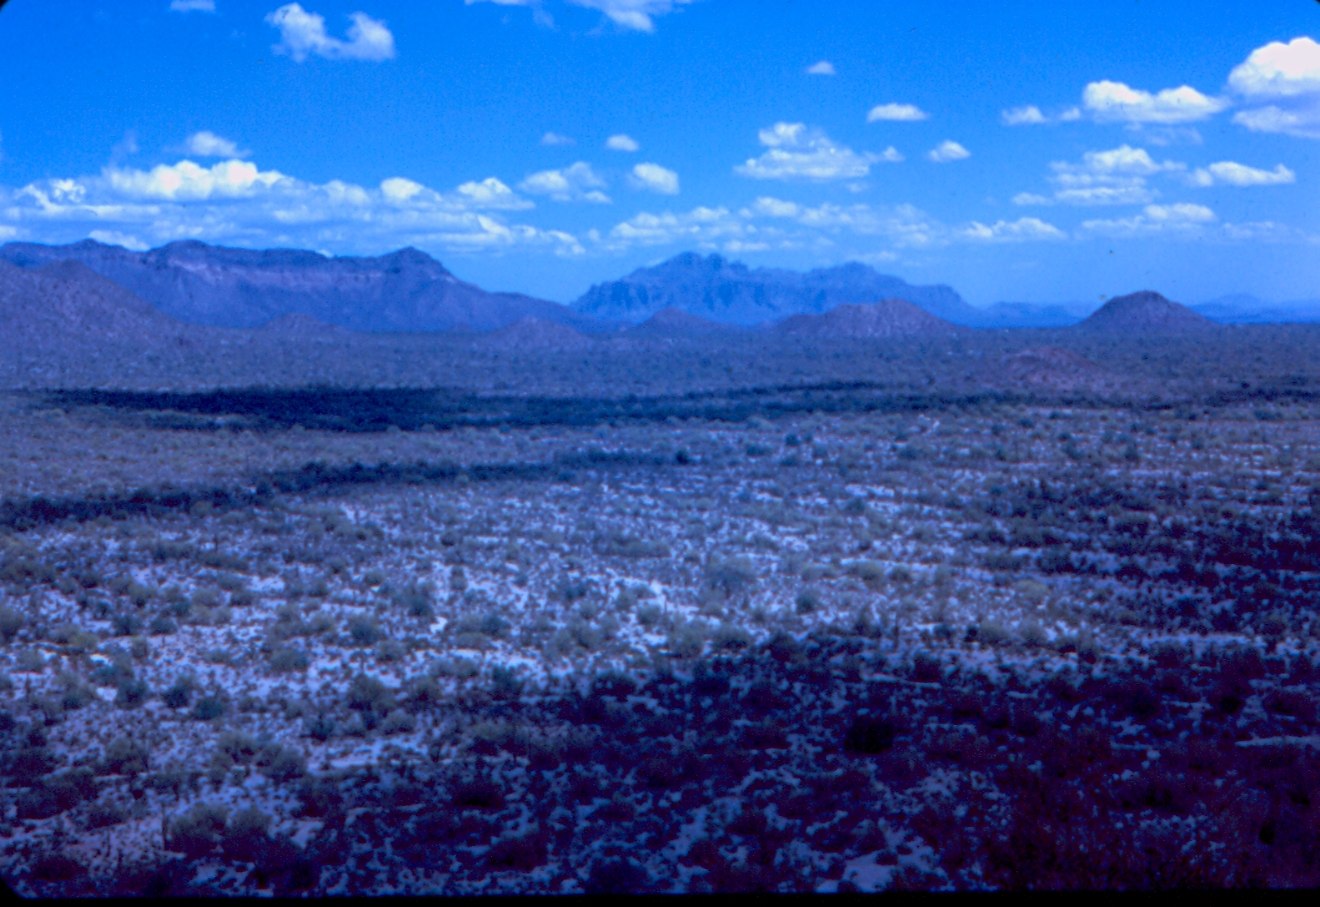 View to the esast/SE towards Superstition Mountain.